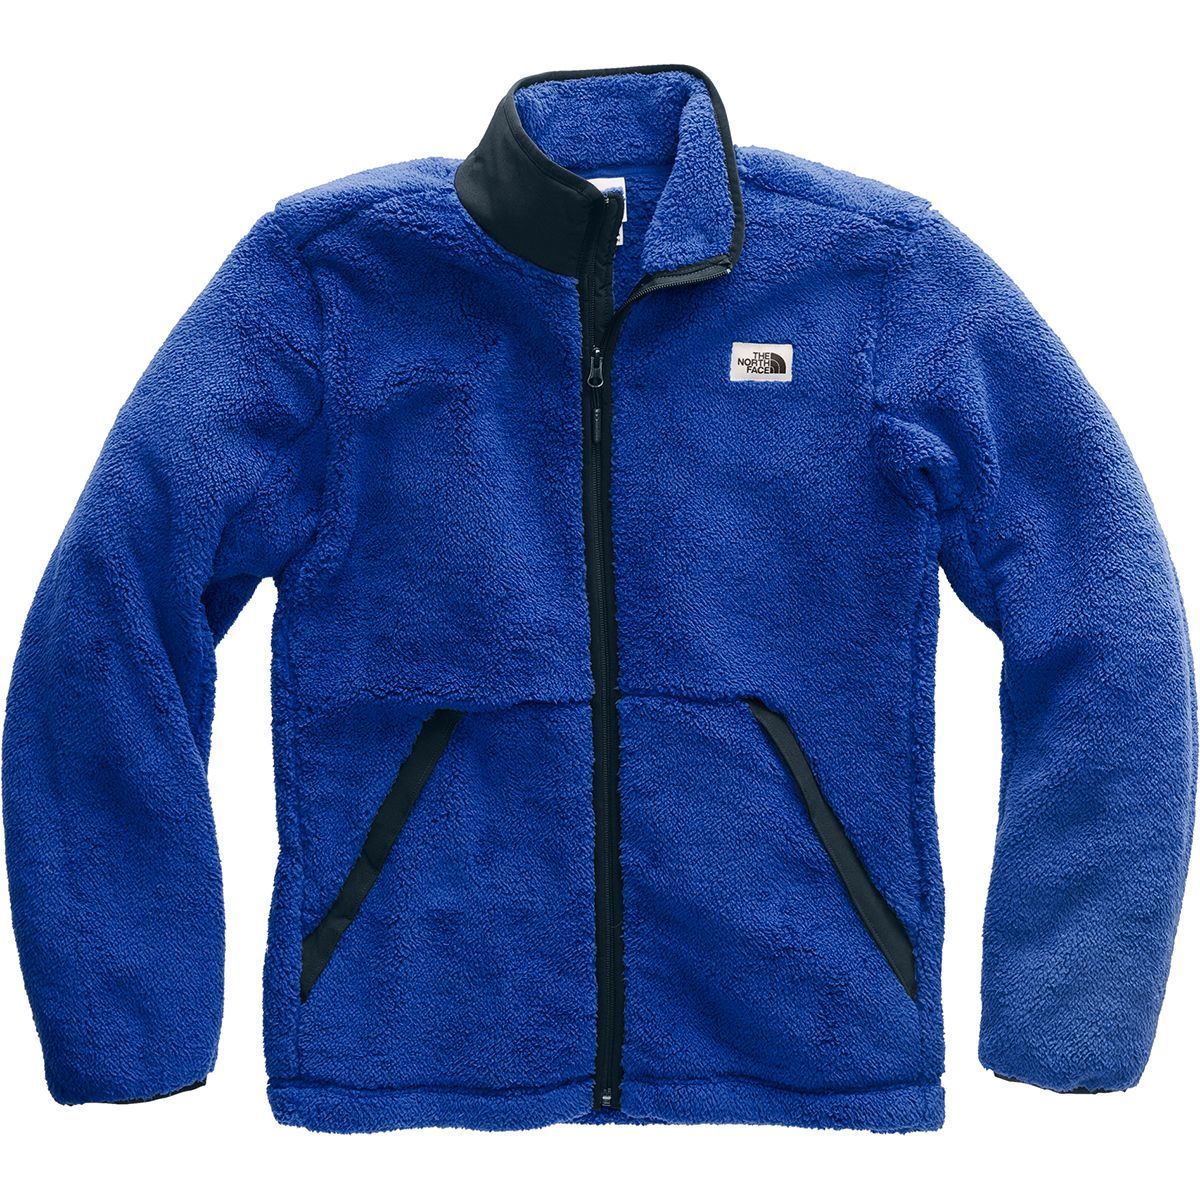 The North Face Campshire Full-Zip Fleece Jacket - Men's - Clothing